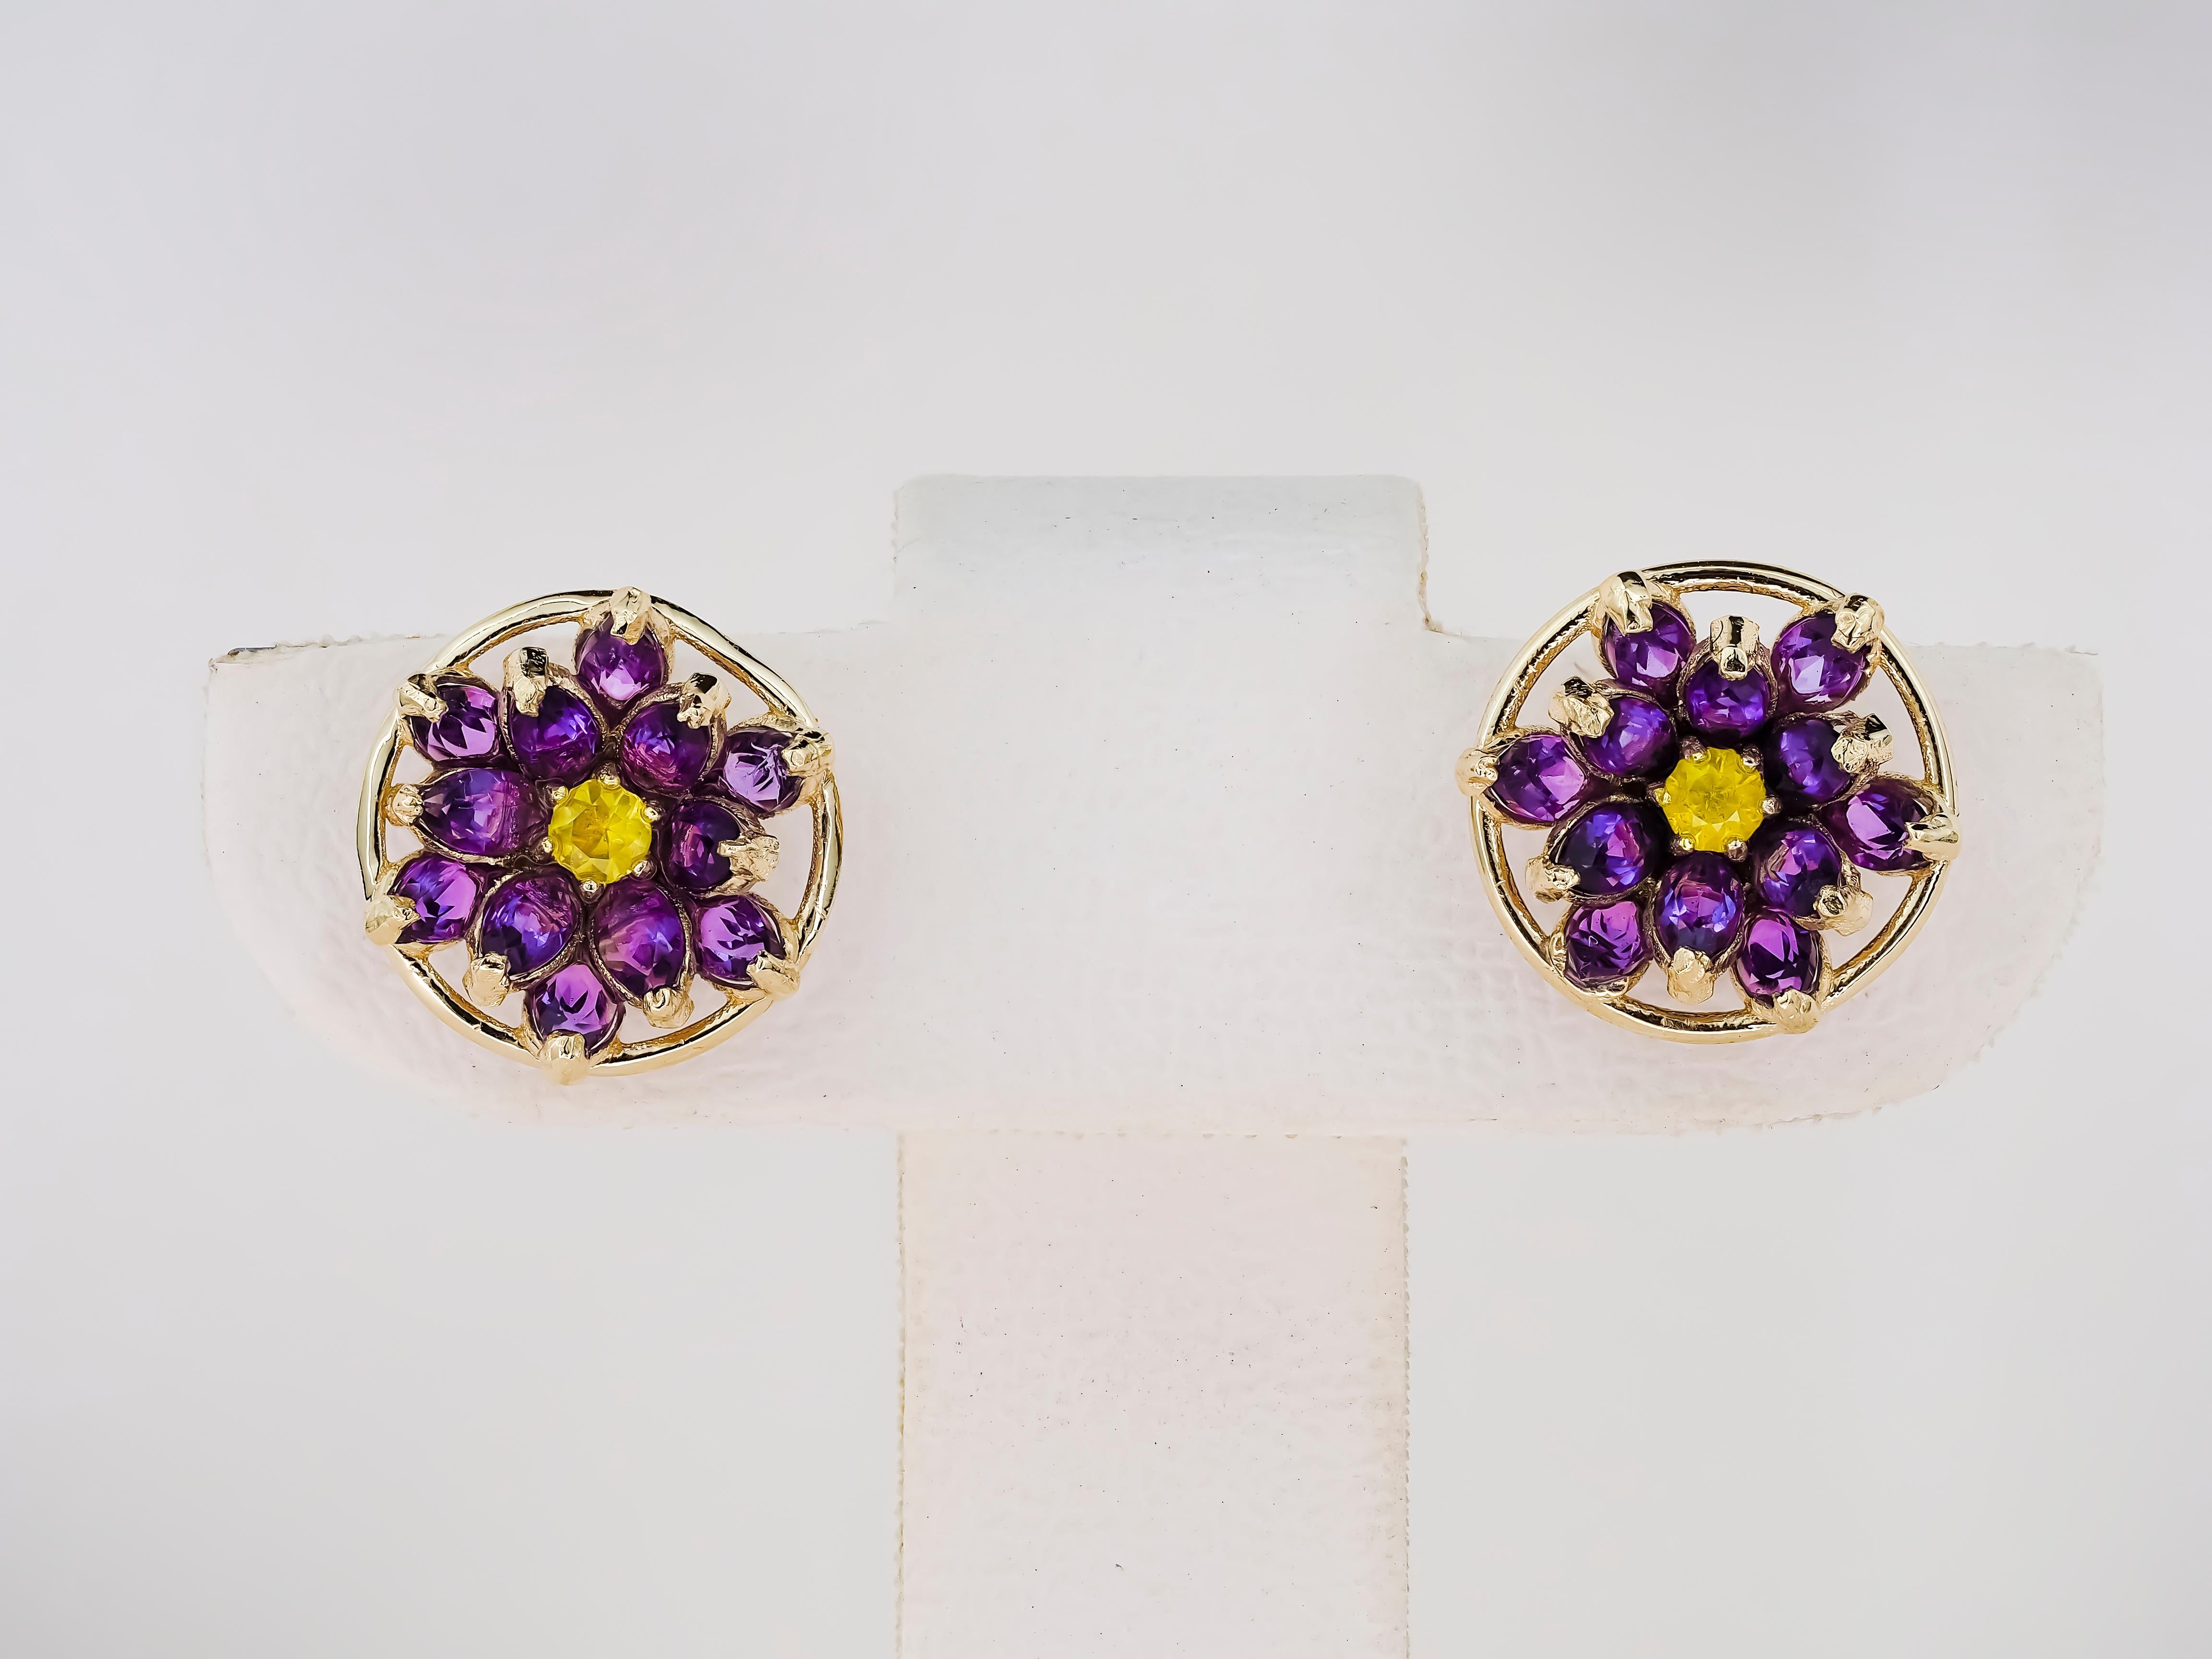 Marquise Cut Lotus Flower Earrings Studs in 14K Gold, Amethyst and Sapphires Earrings! For Sale